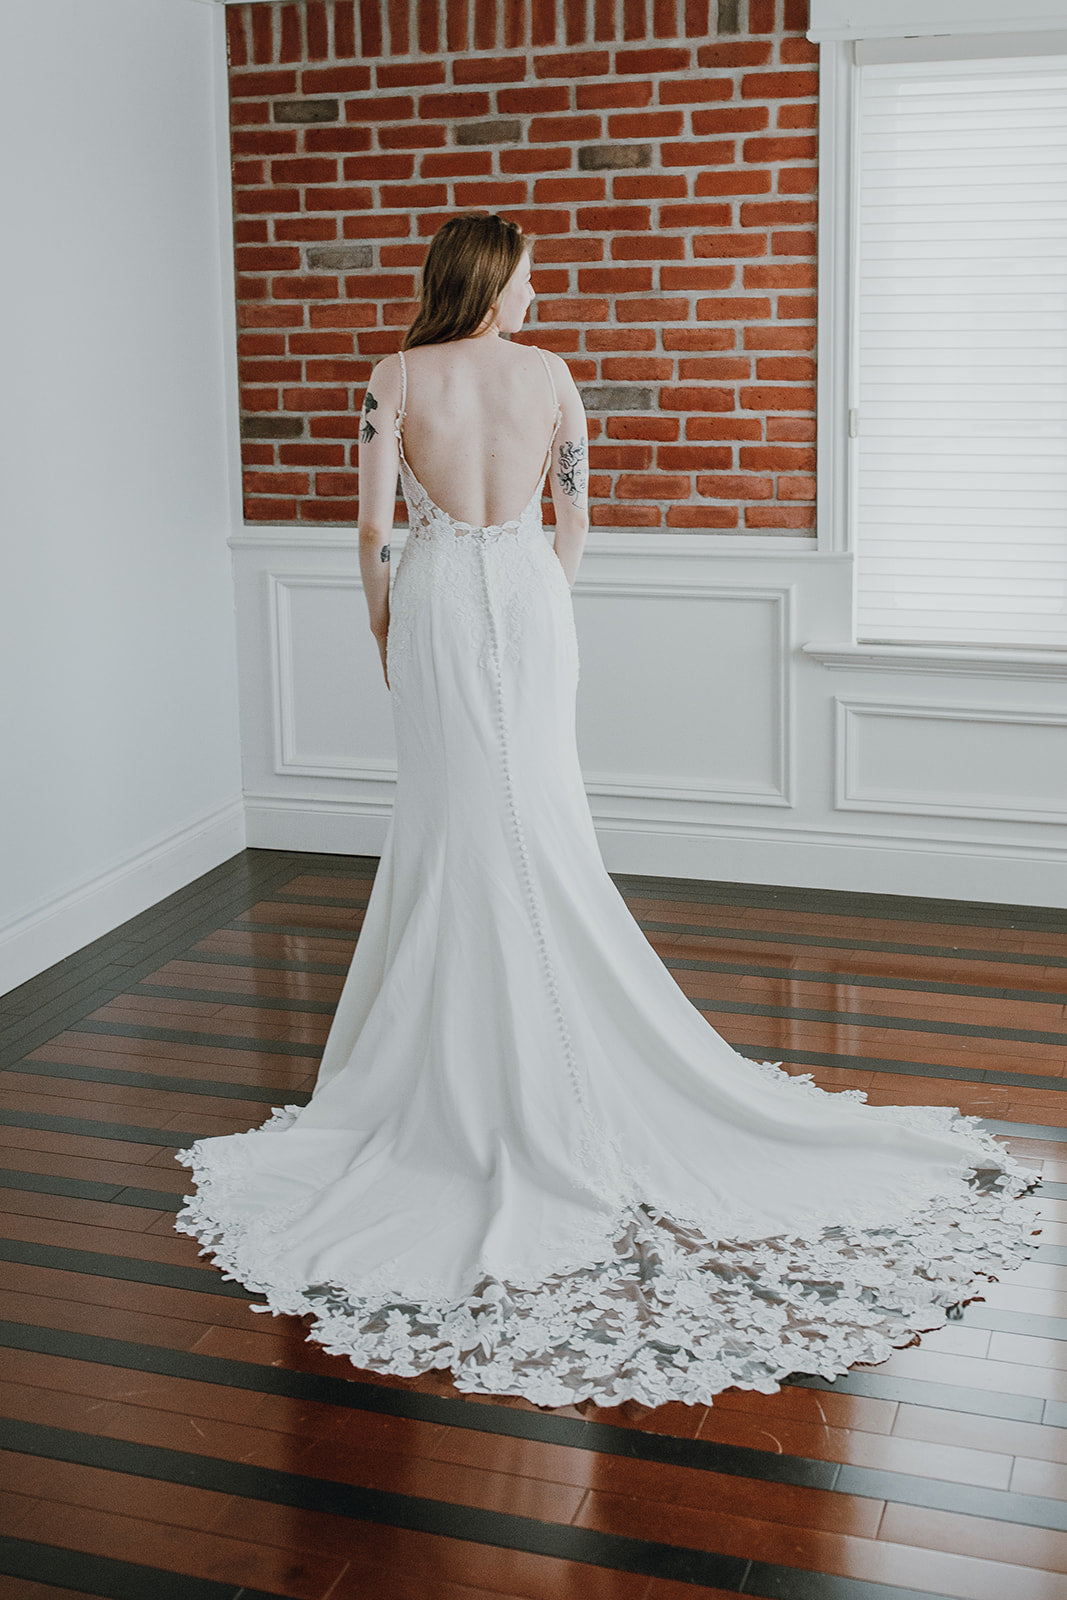 Delilah - slim fit crepe wedding dress with thin straps and totally open back